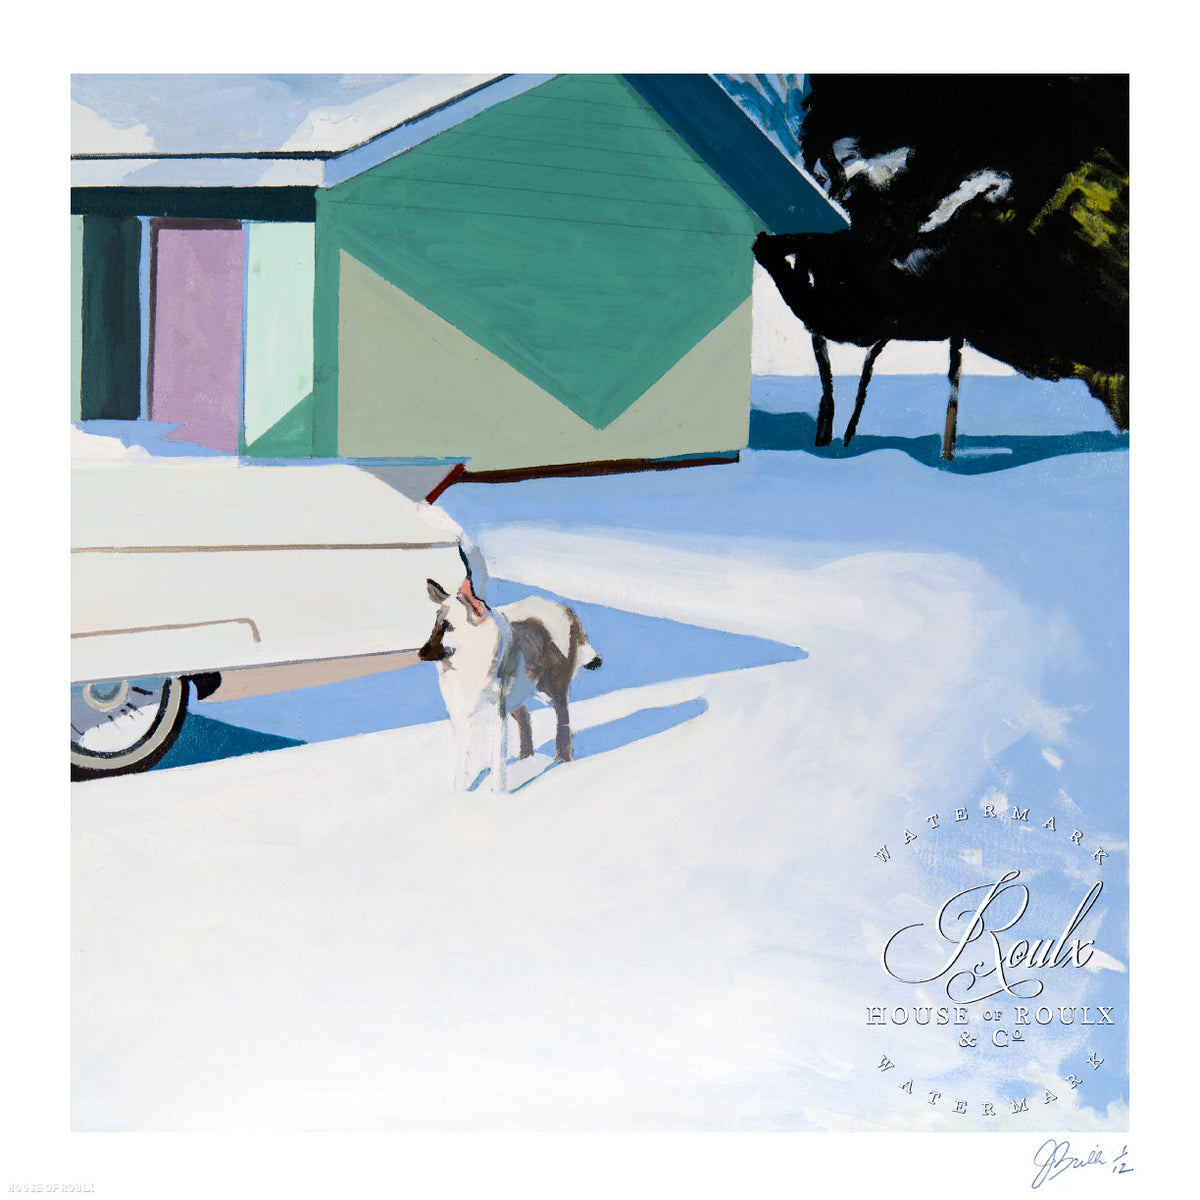 Jessica Brilli &quot;Dog with Caddy&quot; - Archival Print, Limited Edition of 12 - 17 x 17&quot;